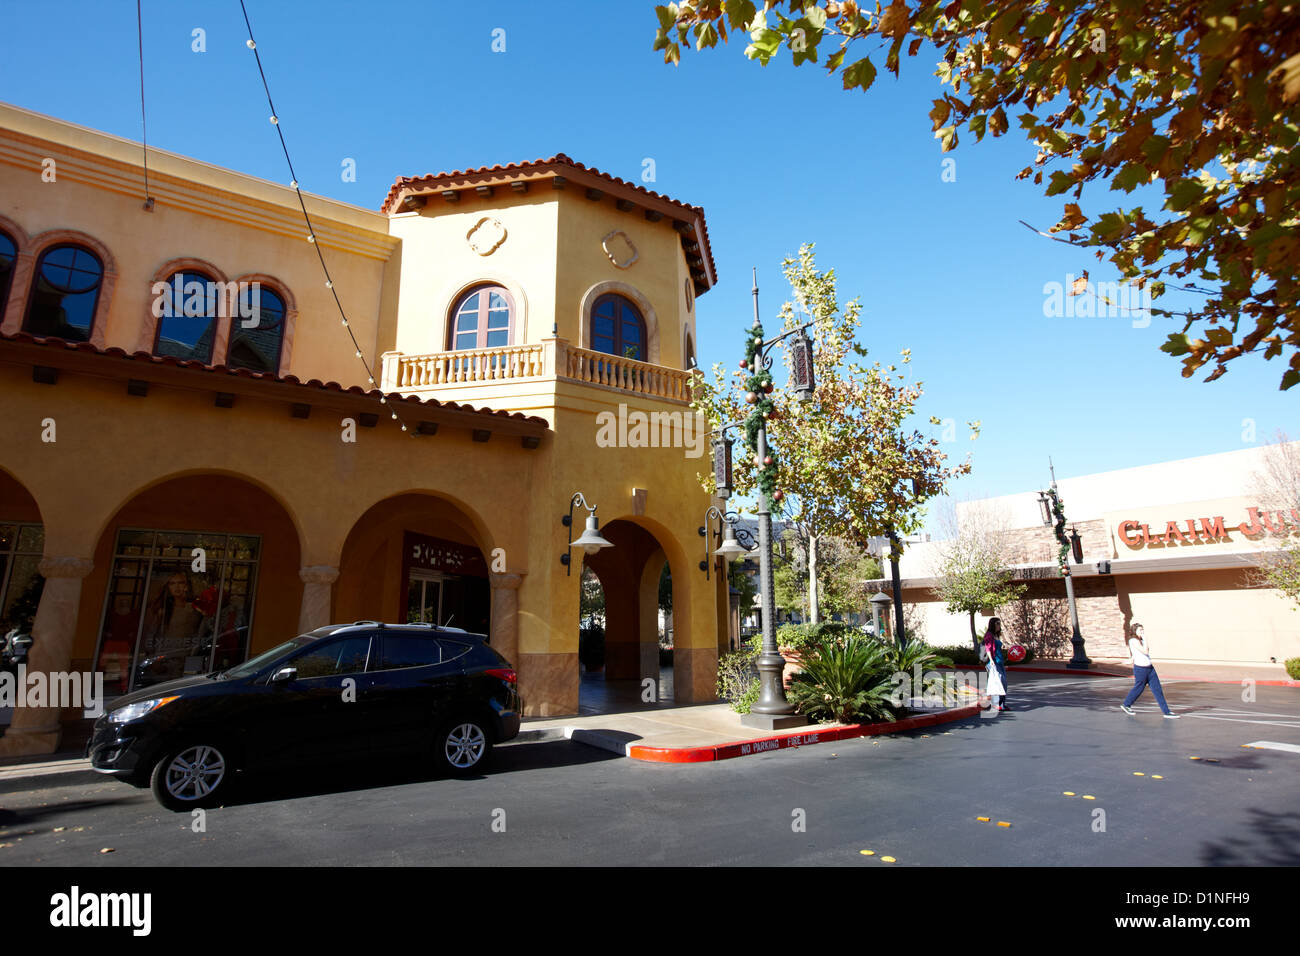 Town Square Las Vegas High Resolution Stock Photography and Images - Alamy